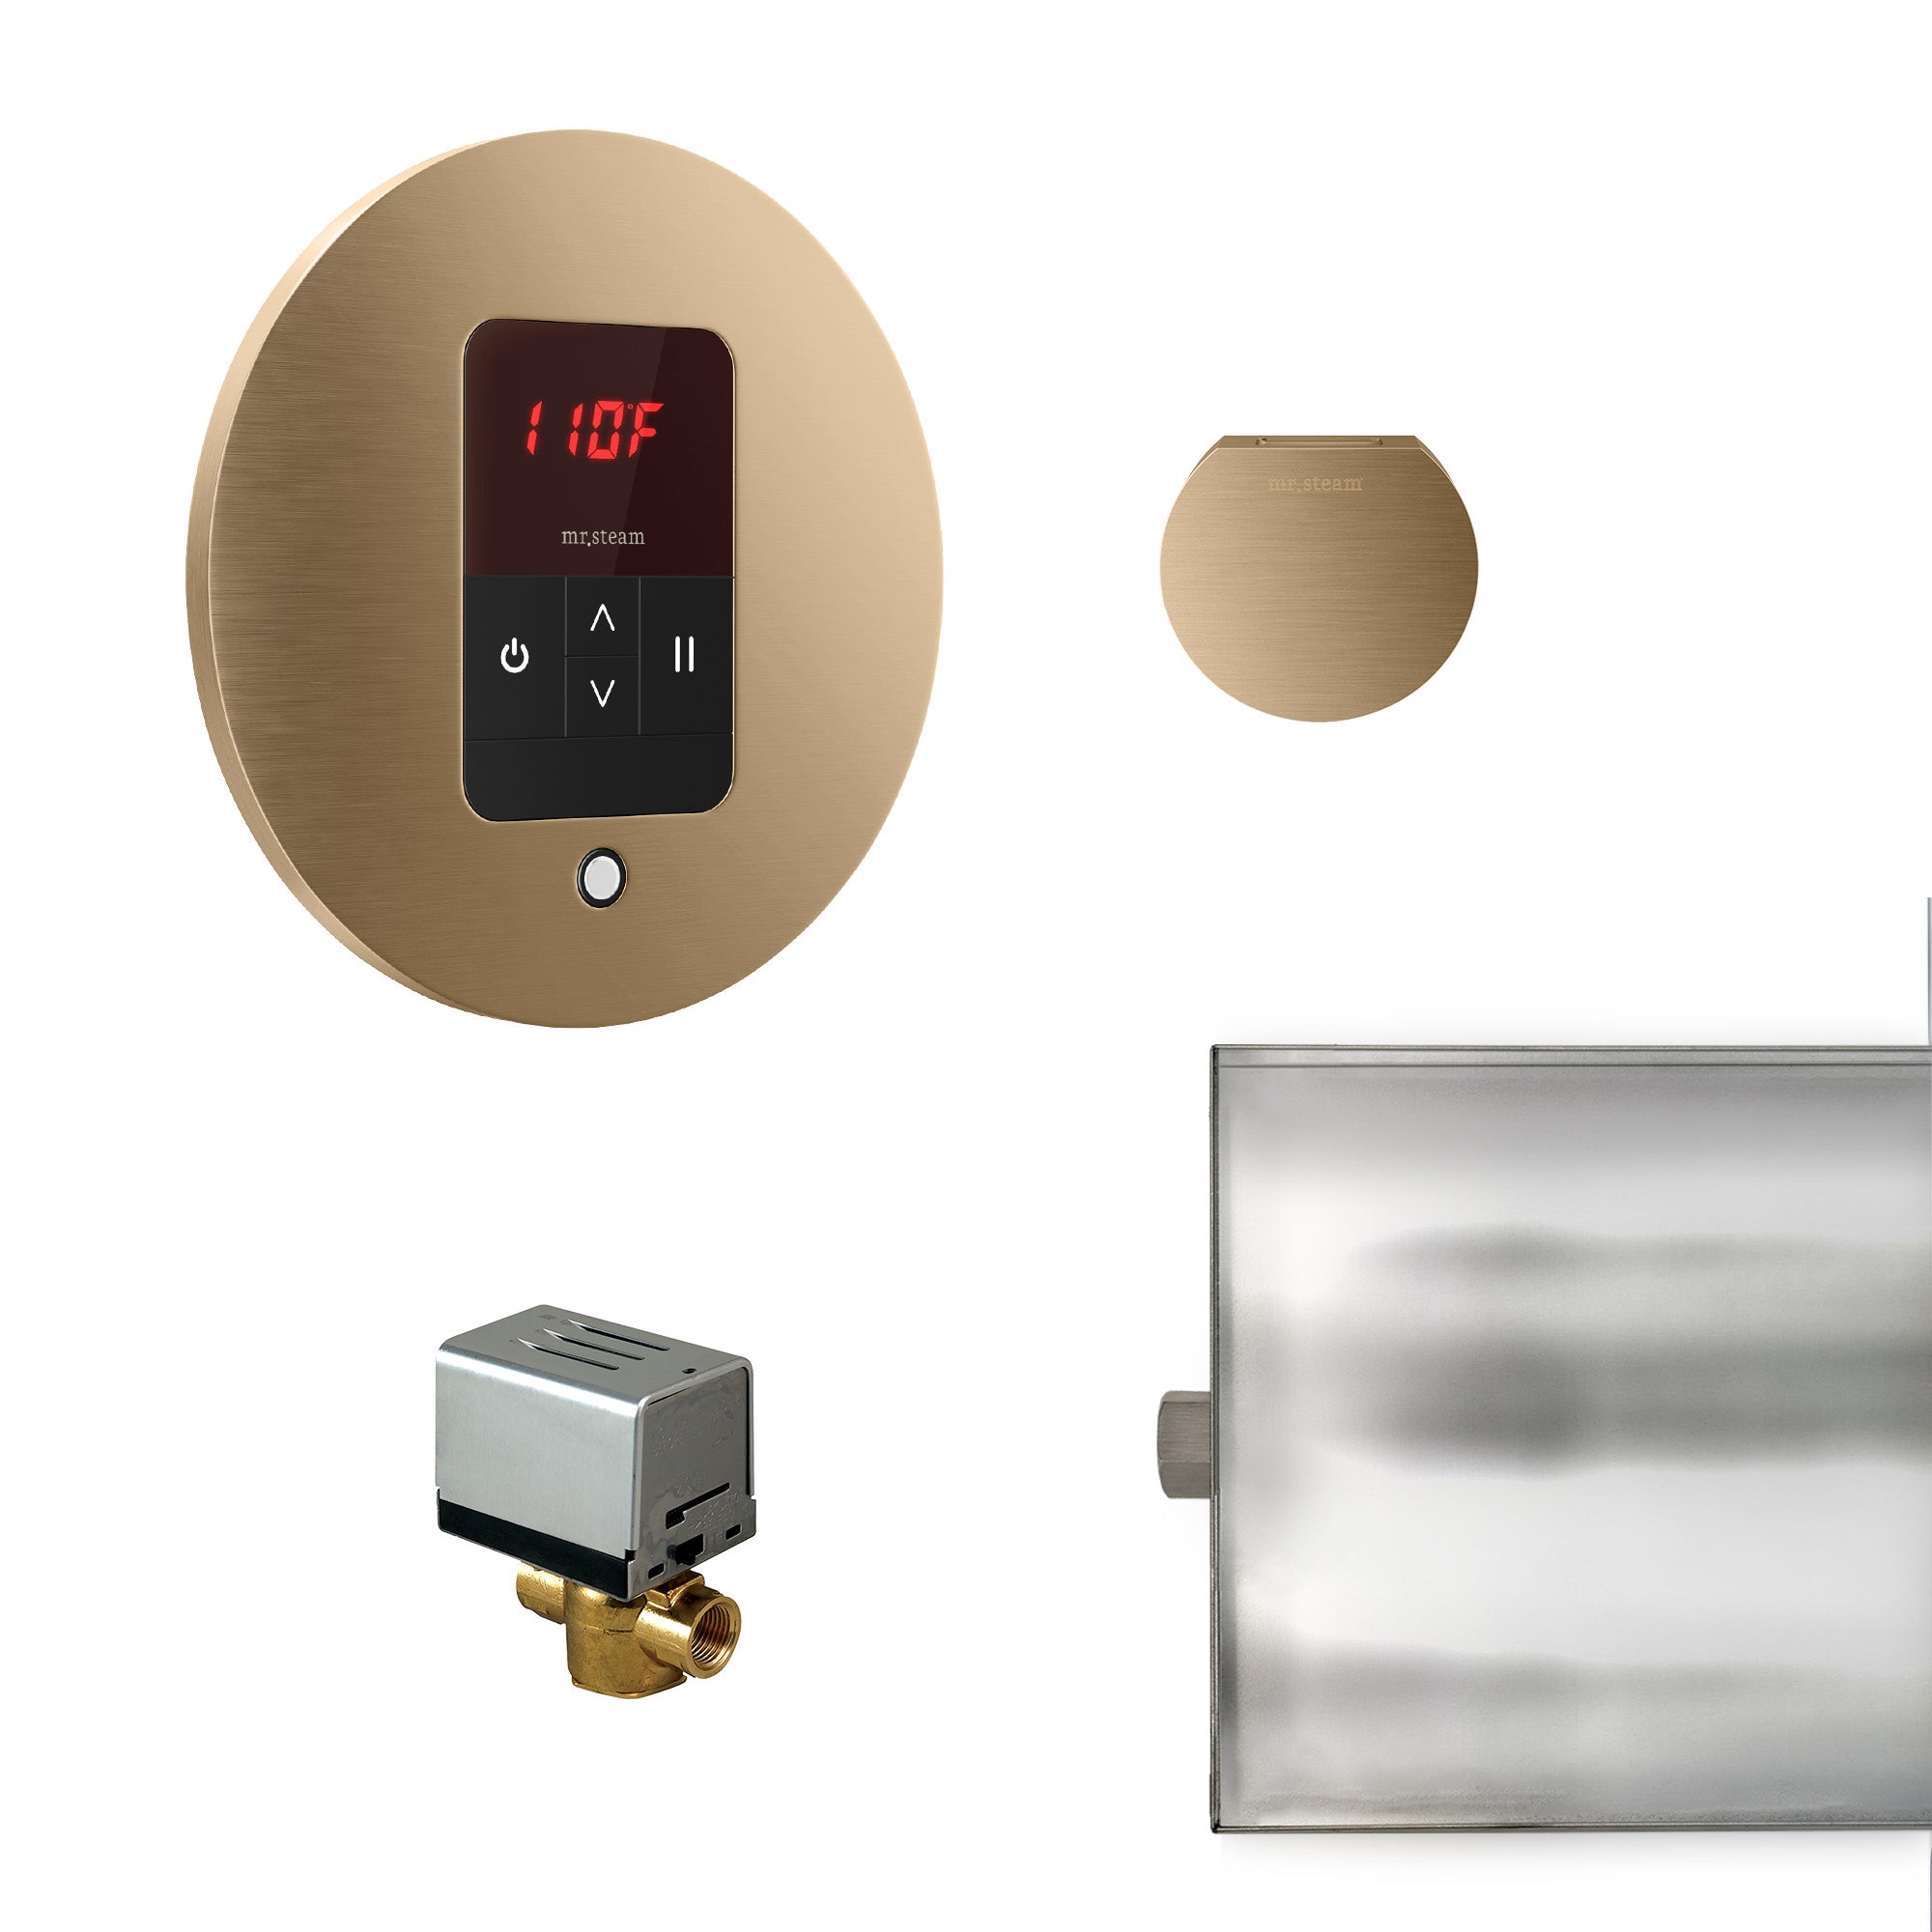 Mr Steam Basic Butler Steam Shower Control Package with iTempo Control and Aroma Designer SteamHead in Round